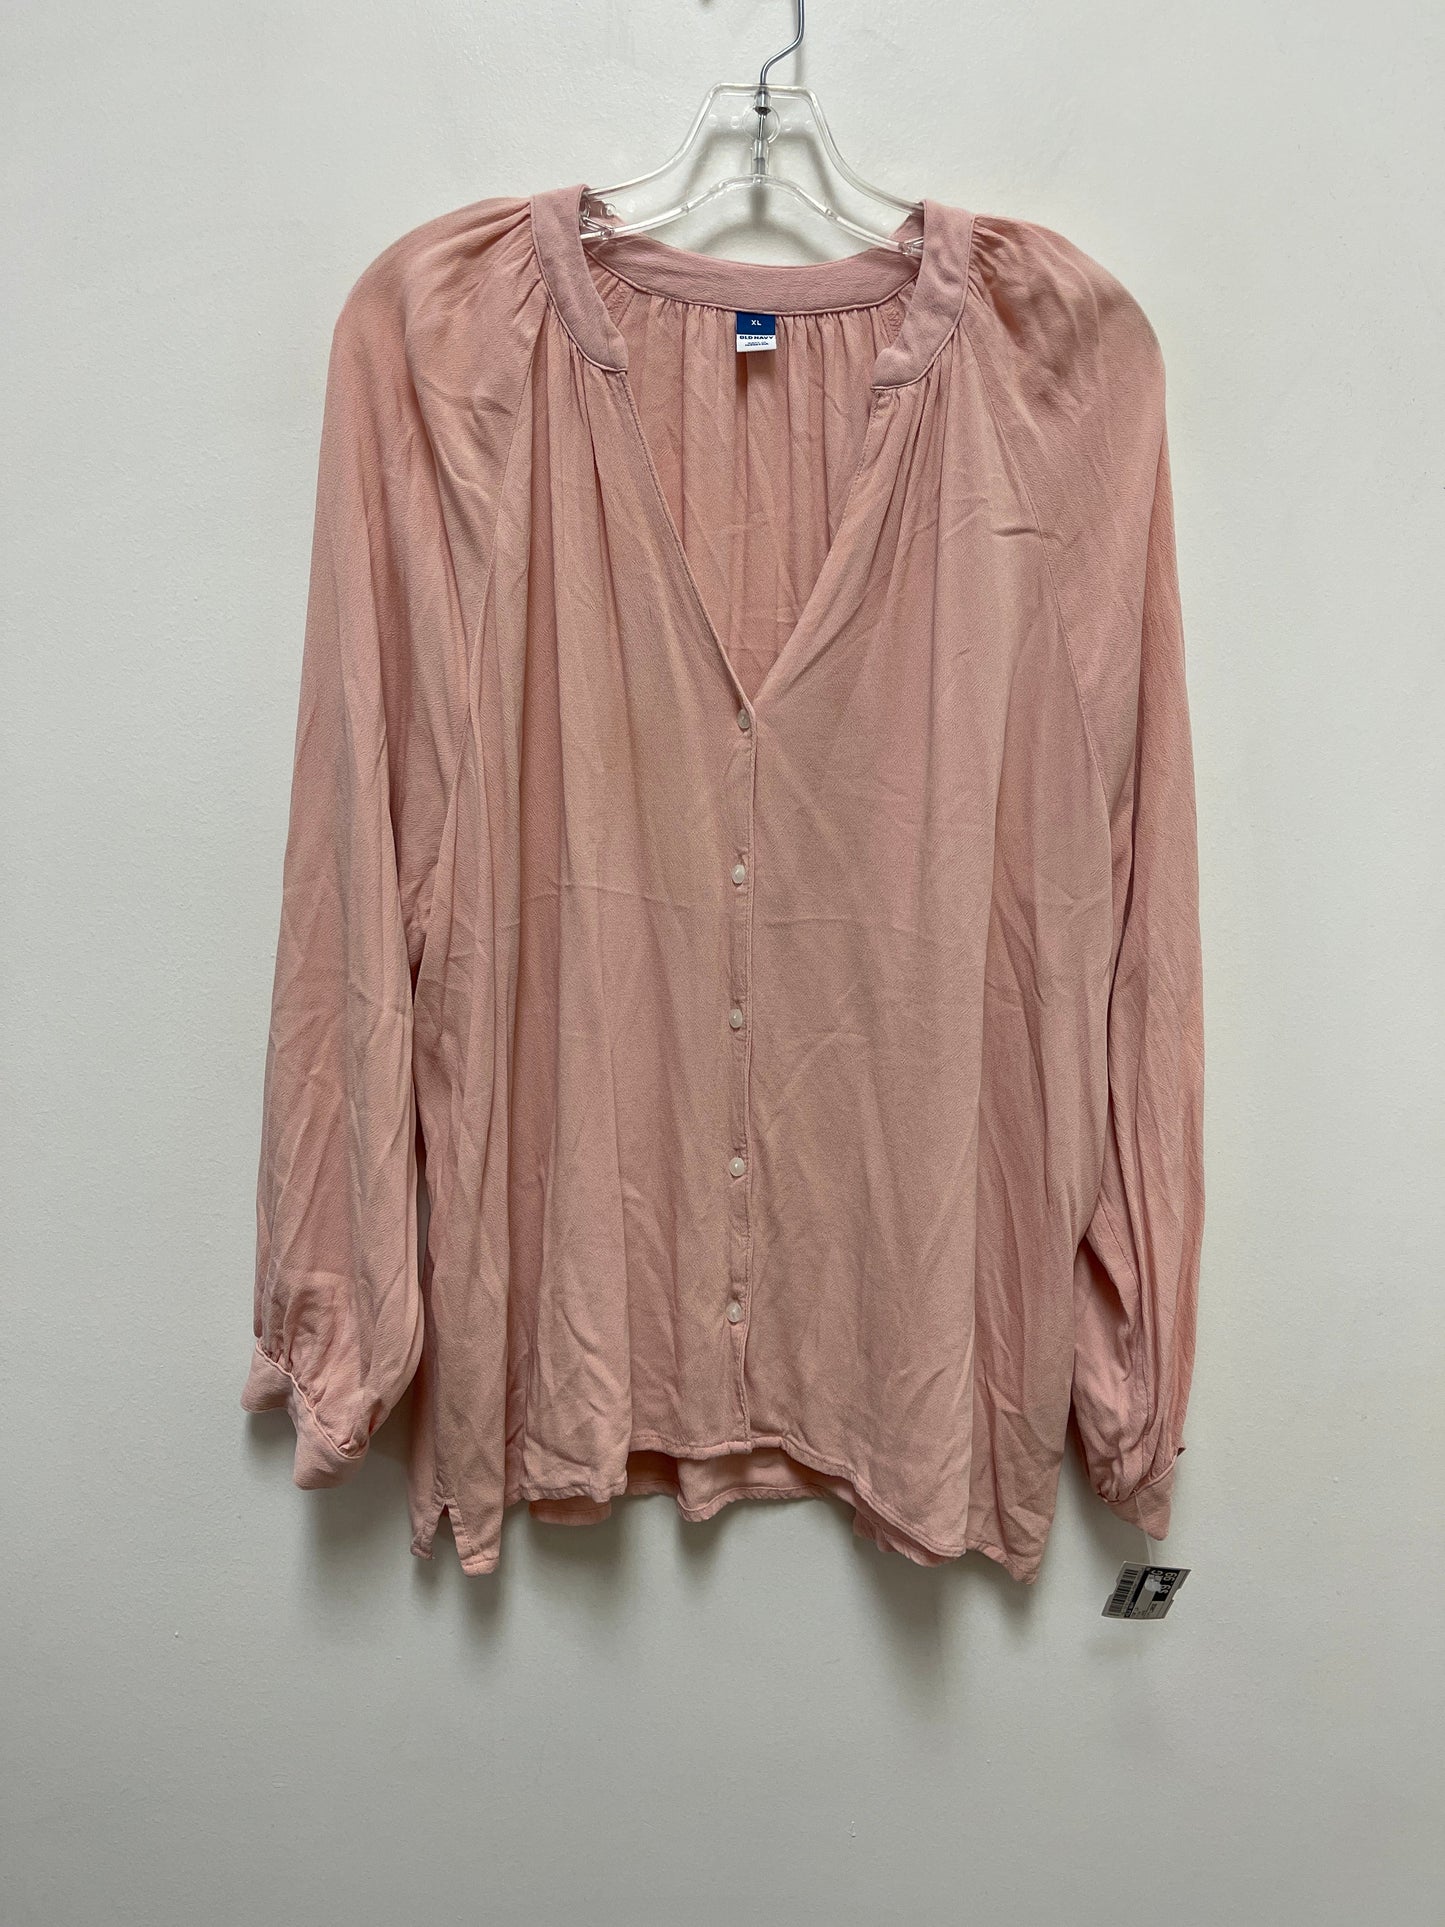 Pink Top Long Sleeve Old Navy, Size Large